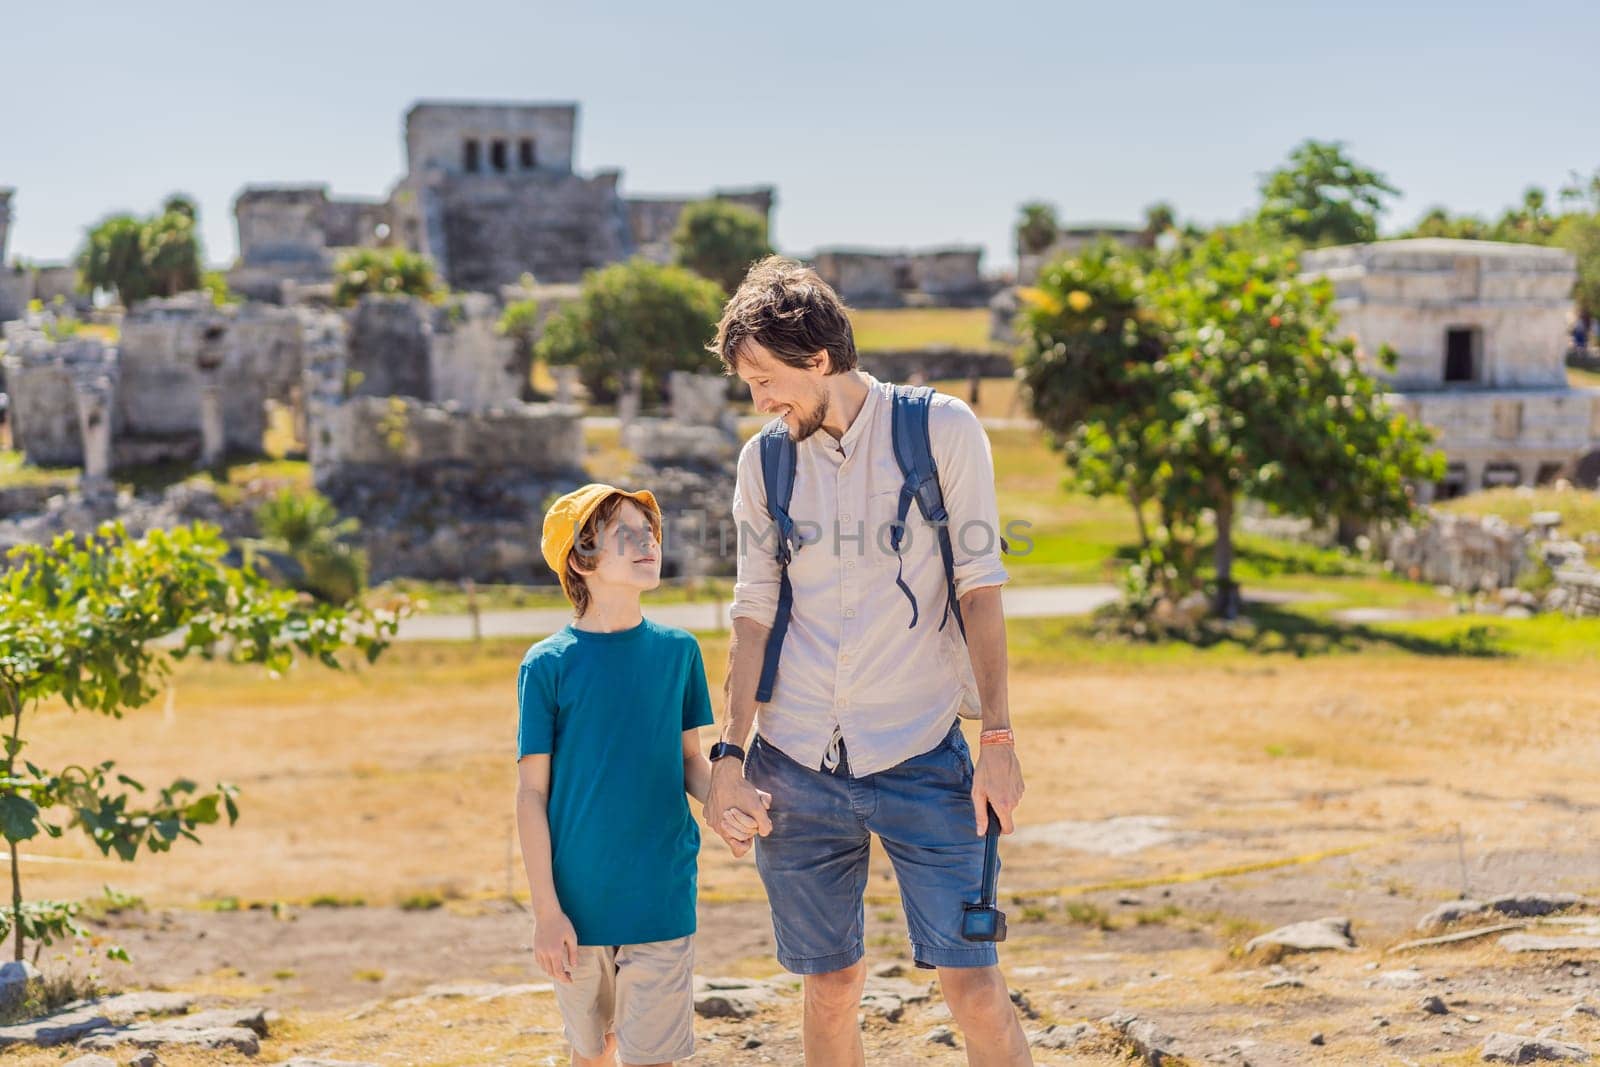 Father and son tourists enjoying the view Pre-Columbian Mayan walled city of Tulum, Quintana Roo, Mexico, North America, Tulum, Mexico. El Castillo - castle the Mayan city of Tulum main temple by galitskaya